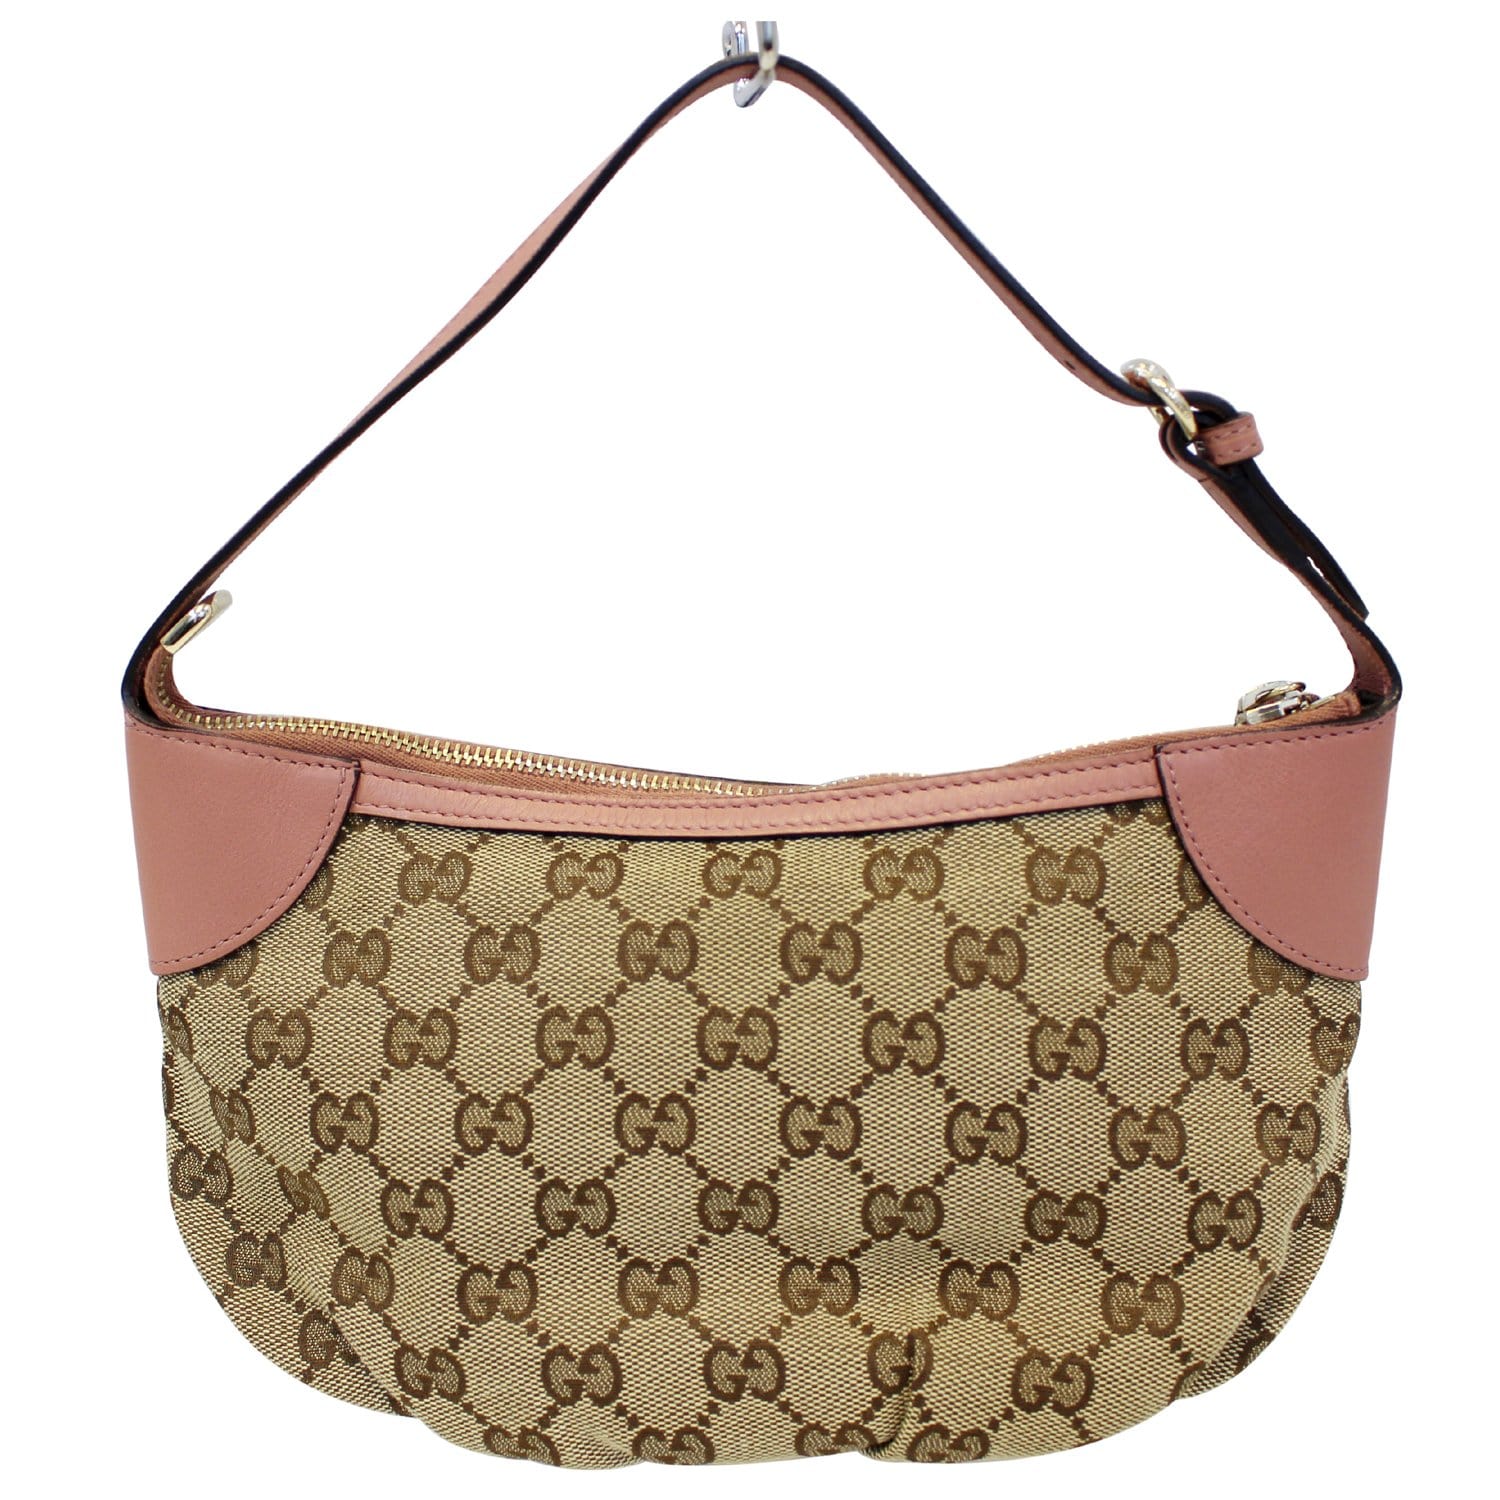 Gucci Red/Beige GG Canvas and Leather Charm Pochette Bag